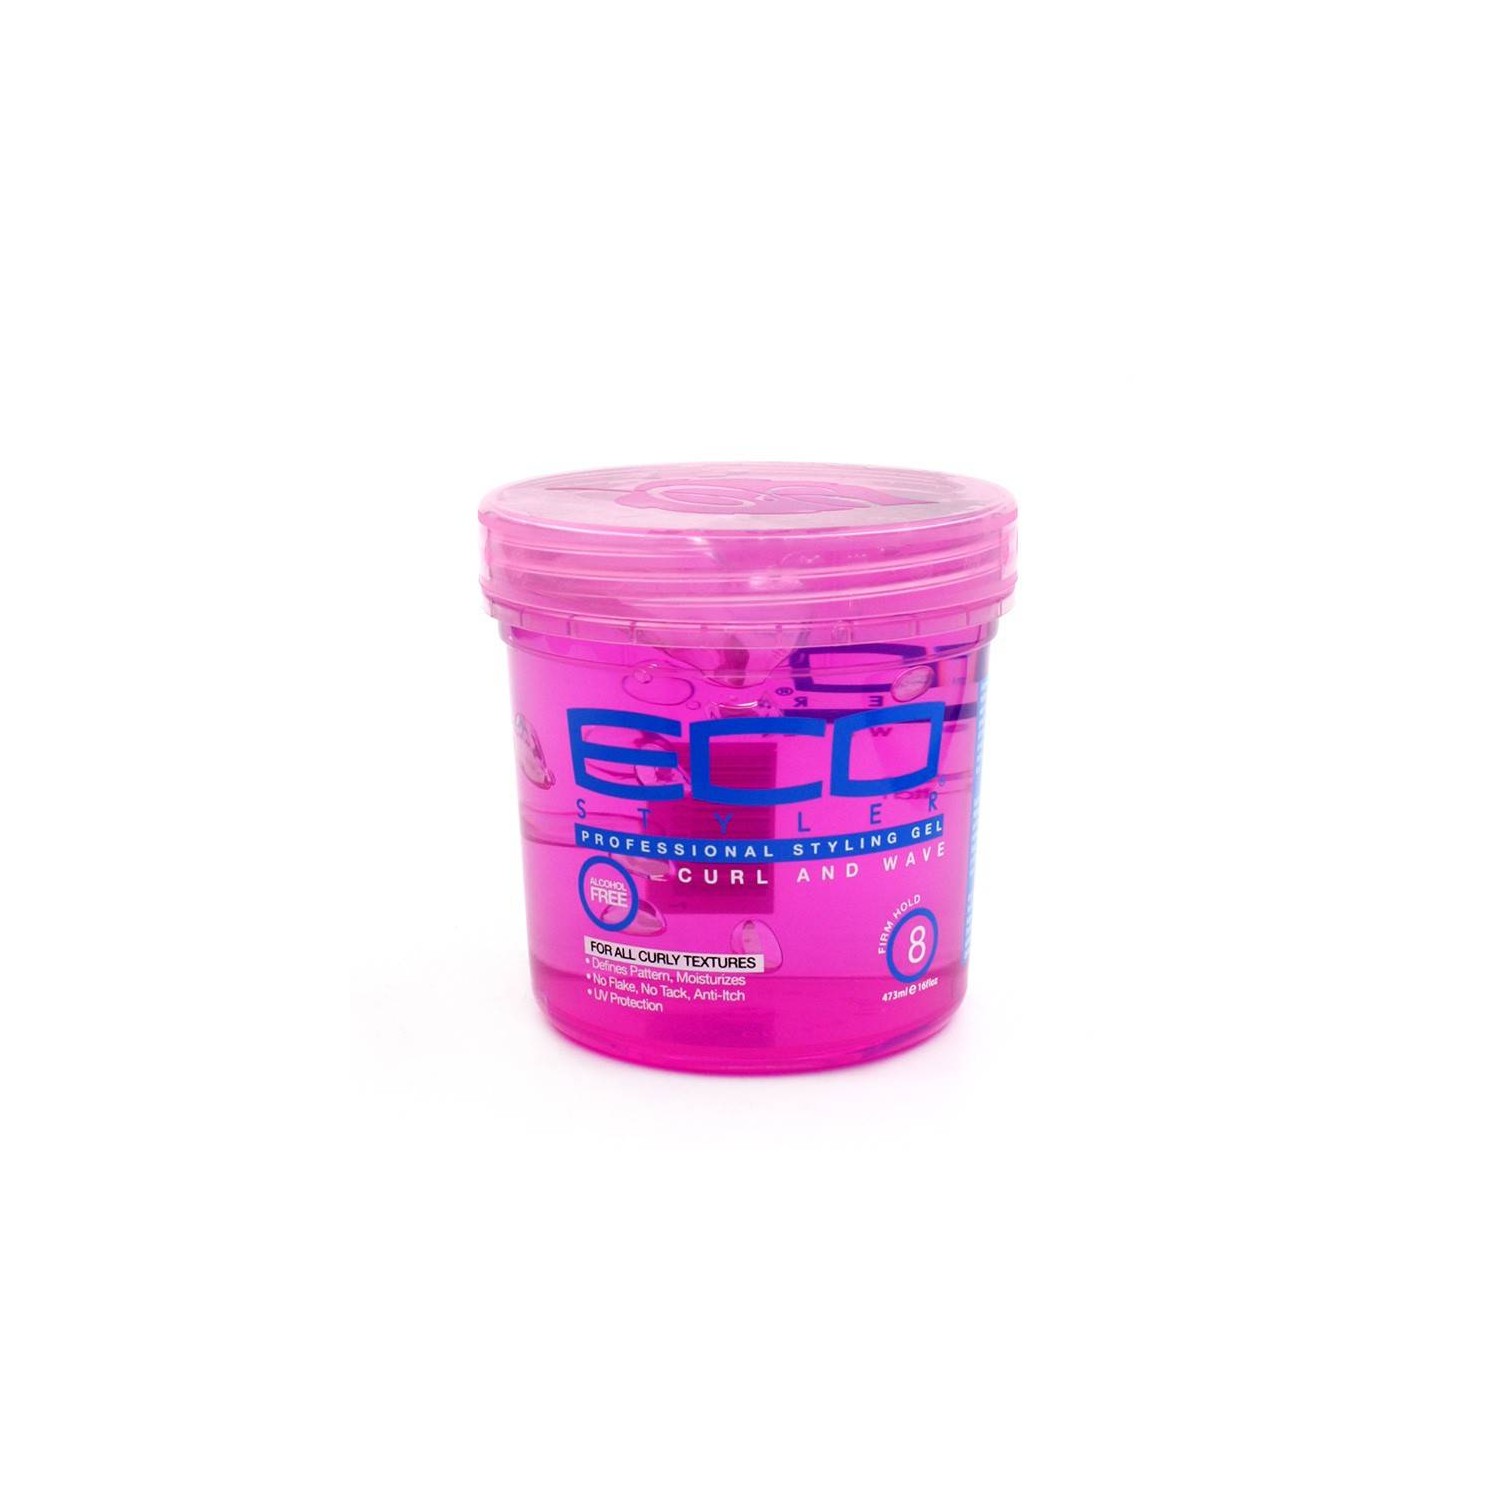 Eco Styler Styling Gel Curl & Wave Pink 946 ml